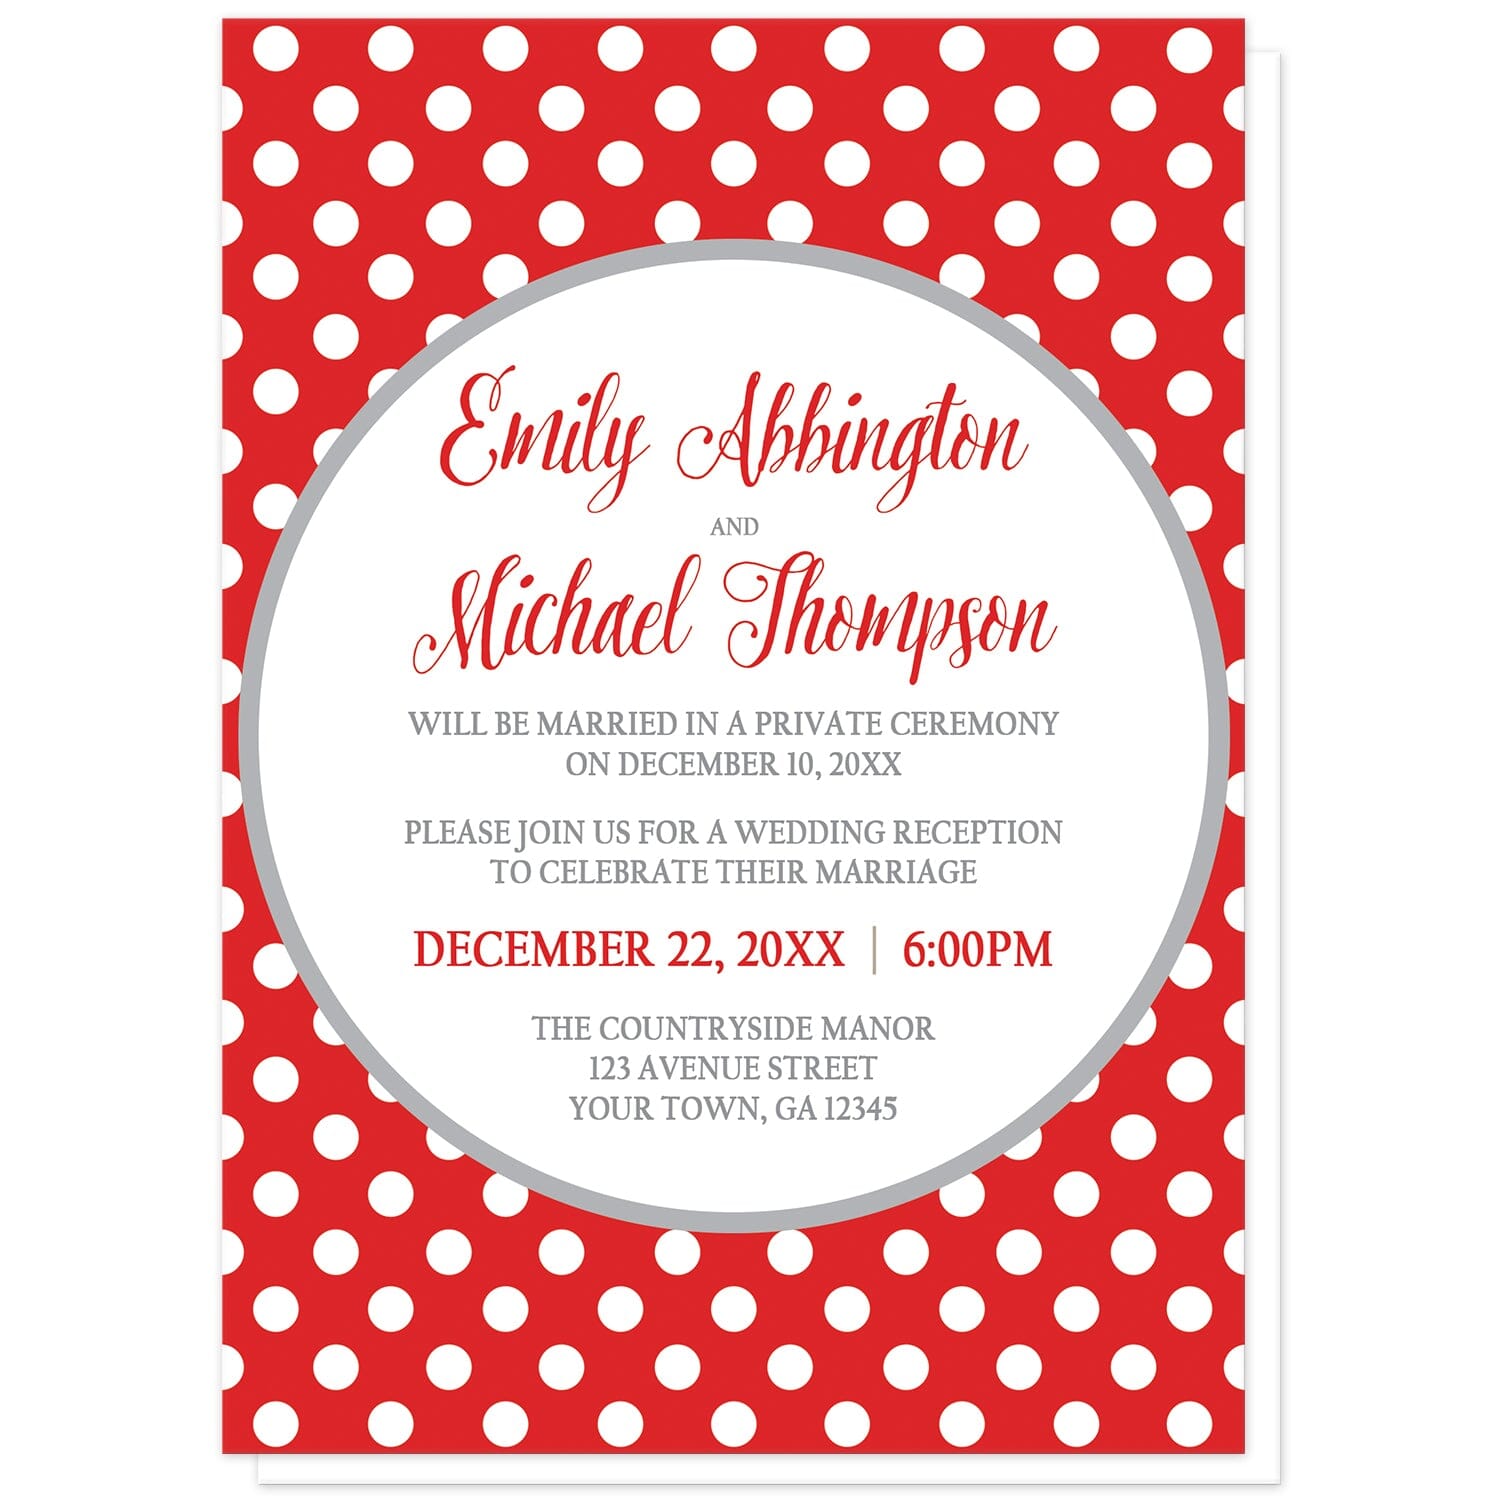 Gray and Red Polka Dot Reception Only Invitations at Artistically Invited. Gray and red polka dot reception only invitations with your personalized post-wedding reception celebration details custom printed in red and gray inside a white circle outlined in light gray, over a red polka dot pattern with white polka dots over red.